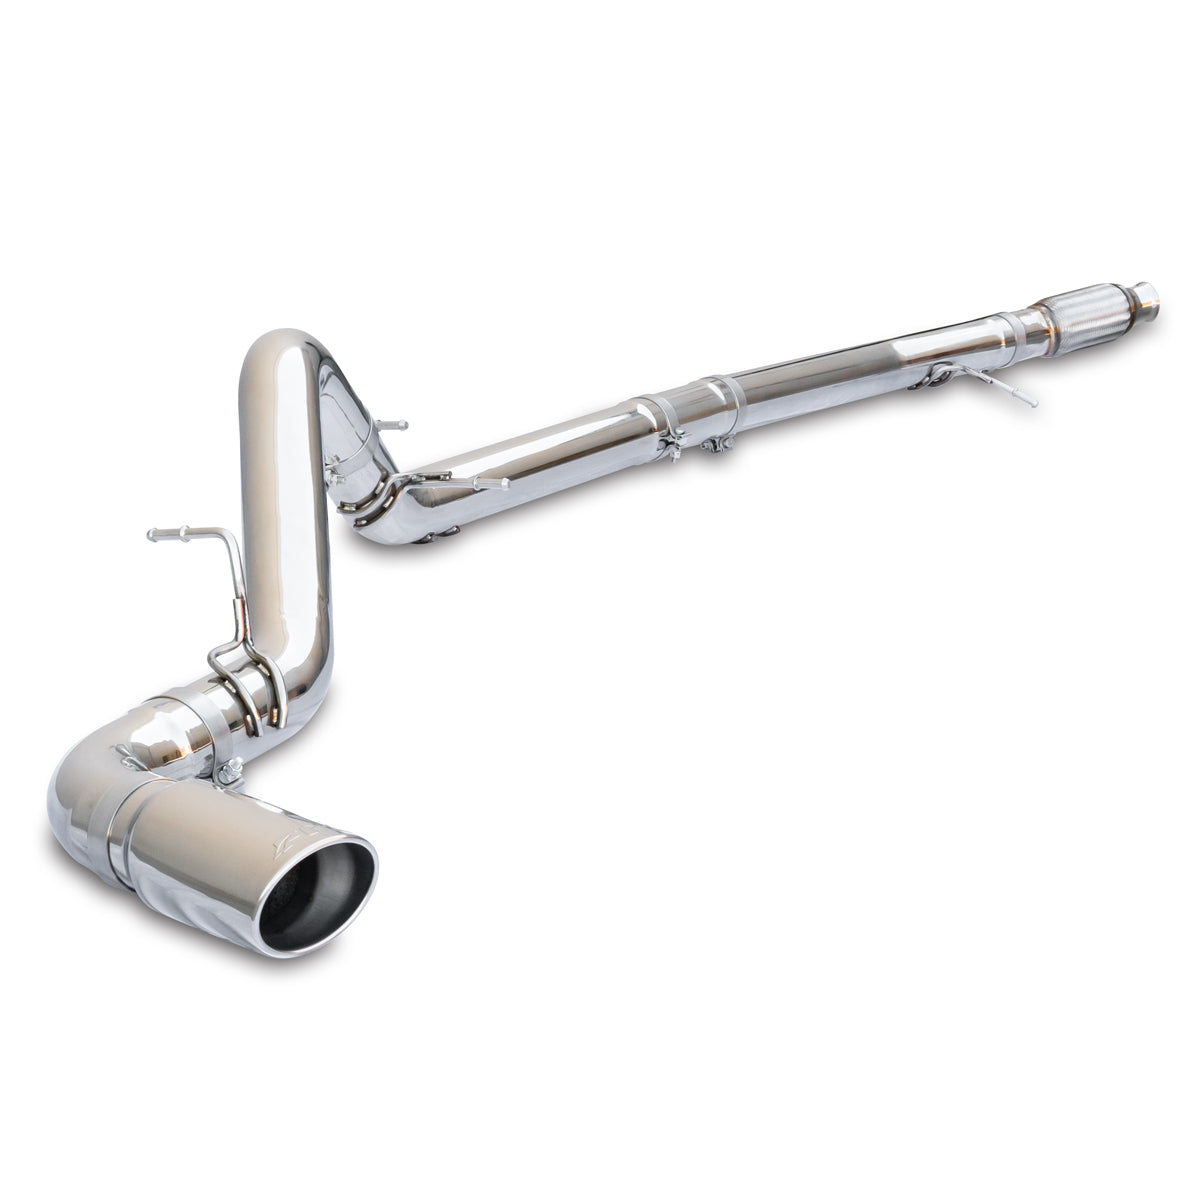 2020-2022 GM 3.0L Duramax 304 Stainless Steel Cat Back Performance Exhaust Kit - Single Exit